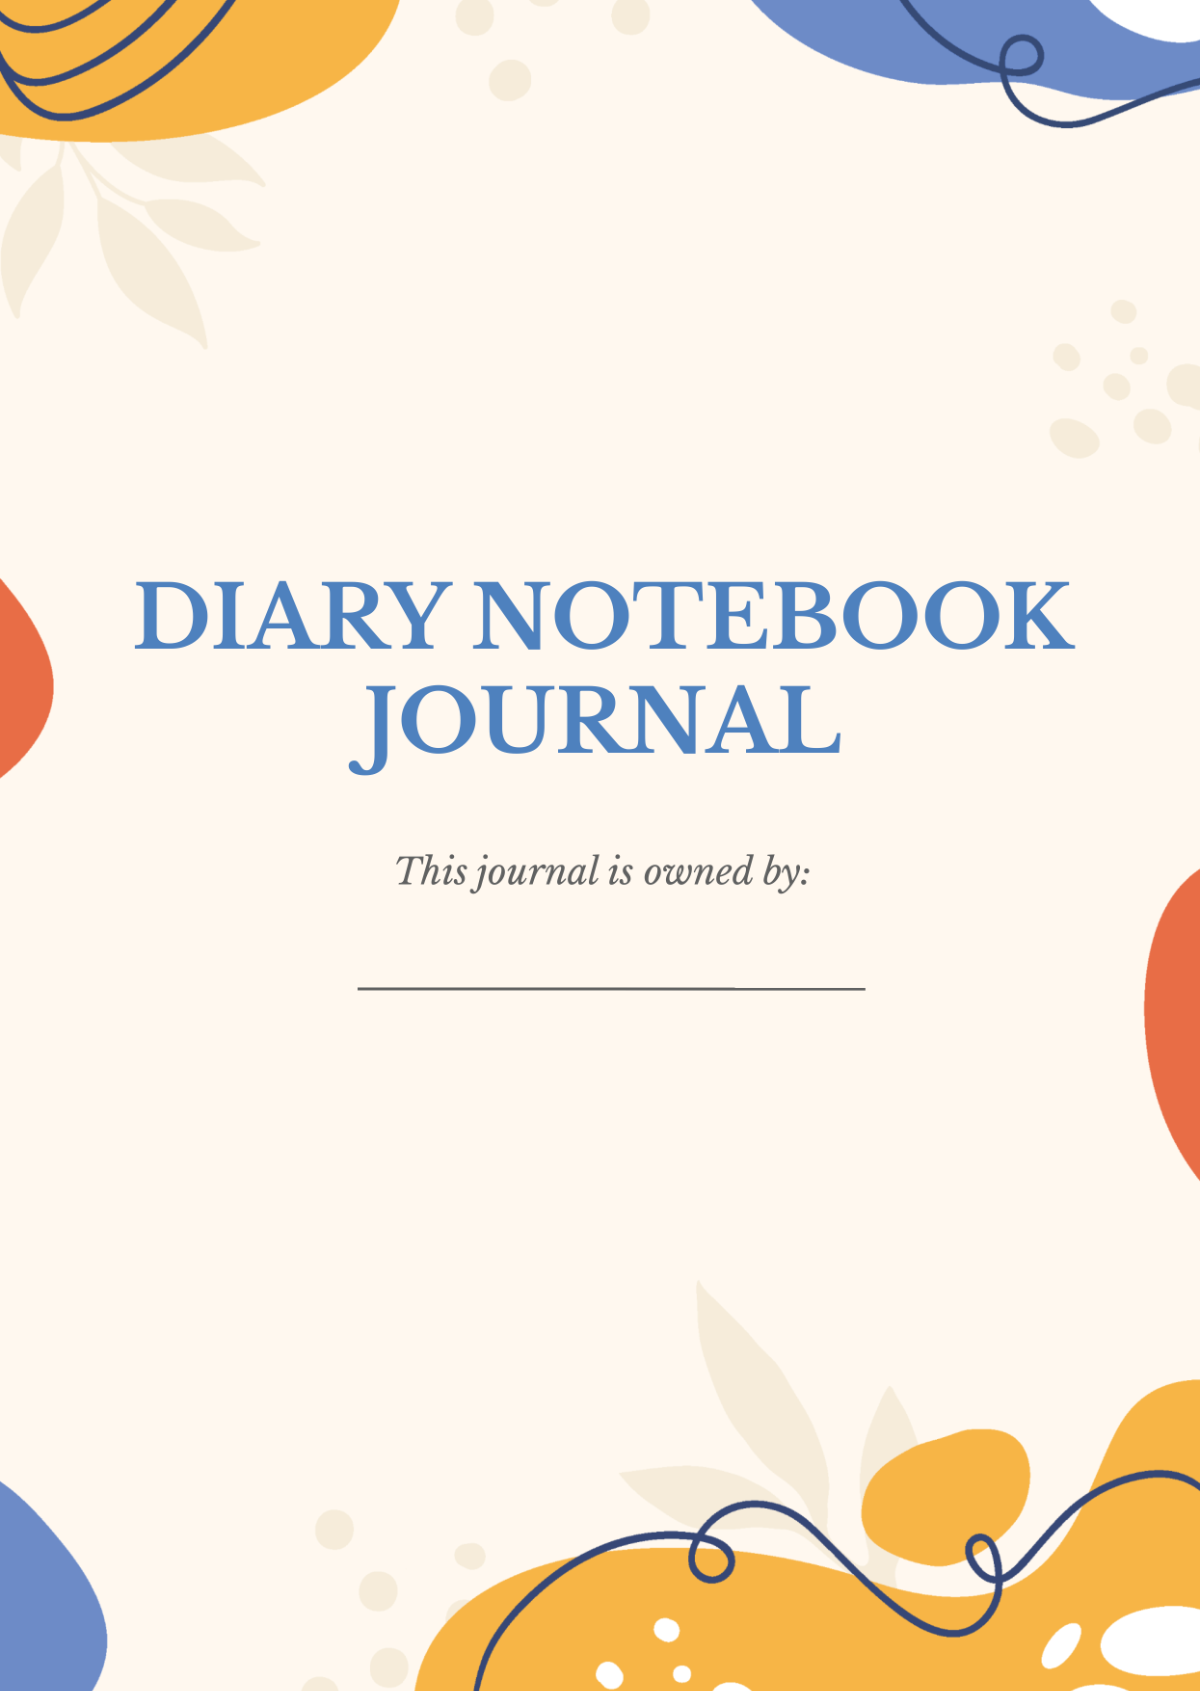 Free Diary Notebook Journals Template